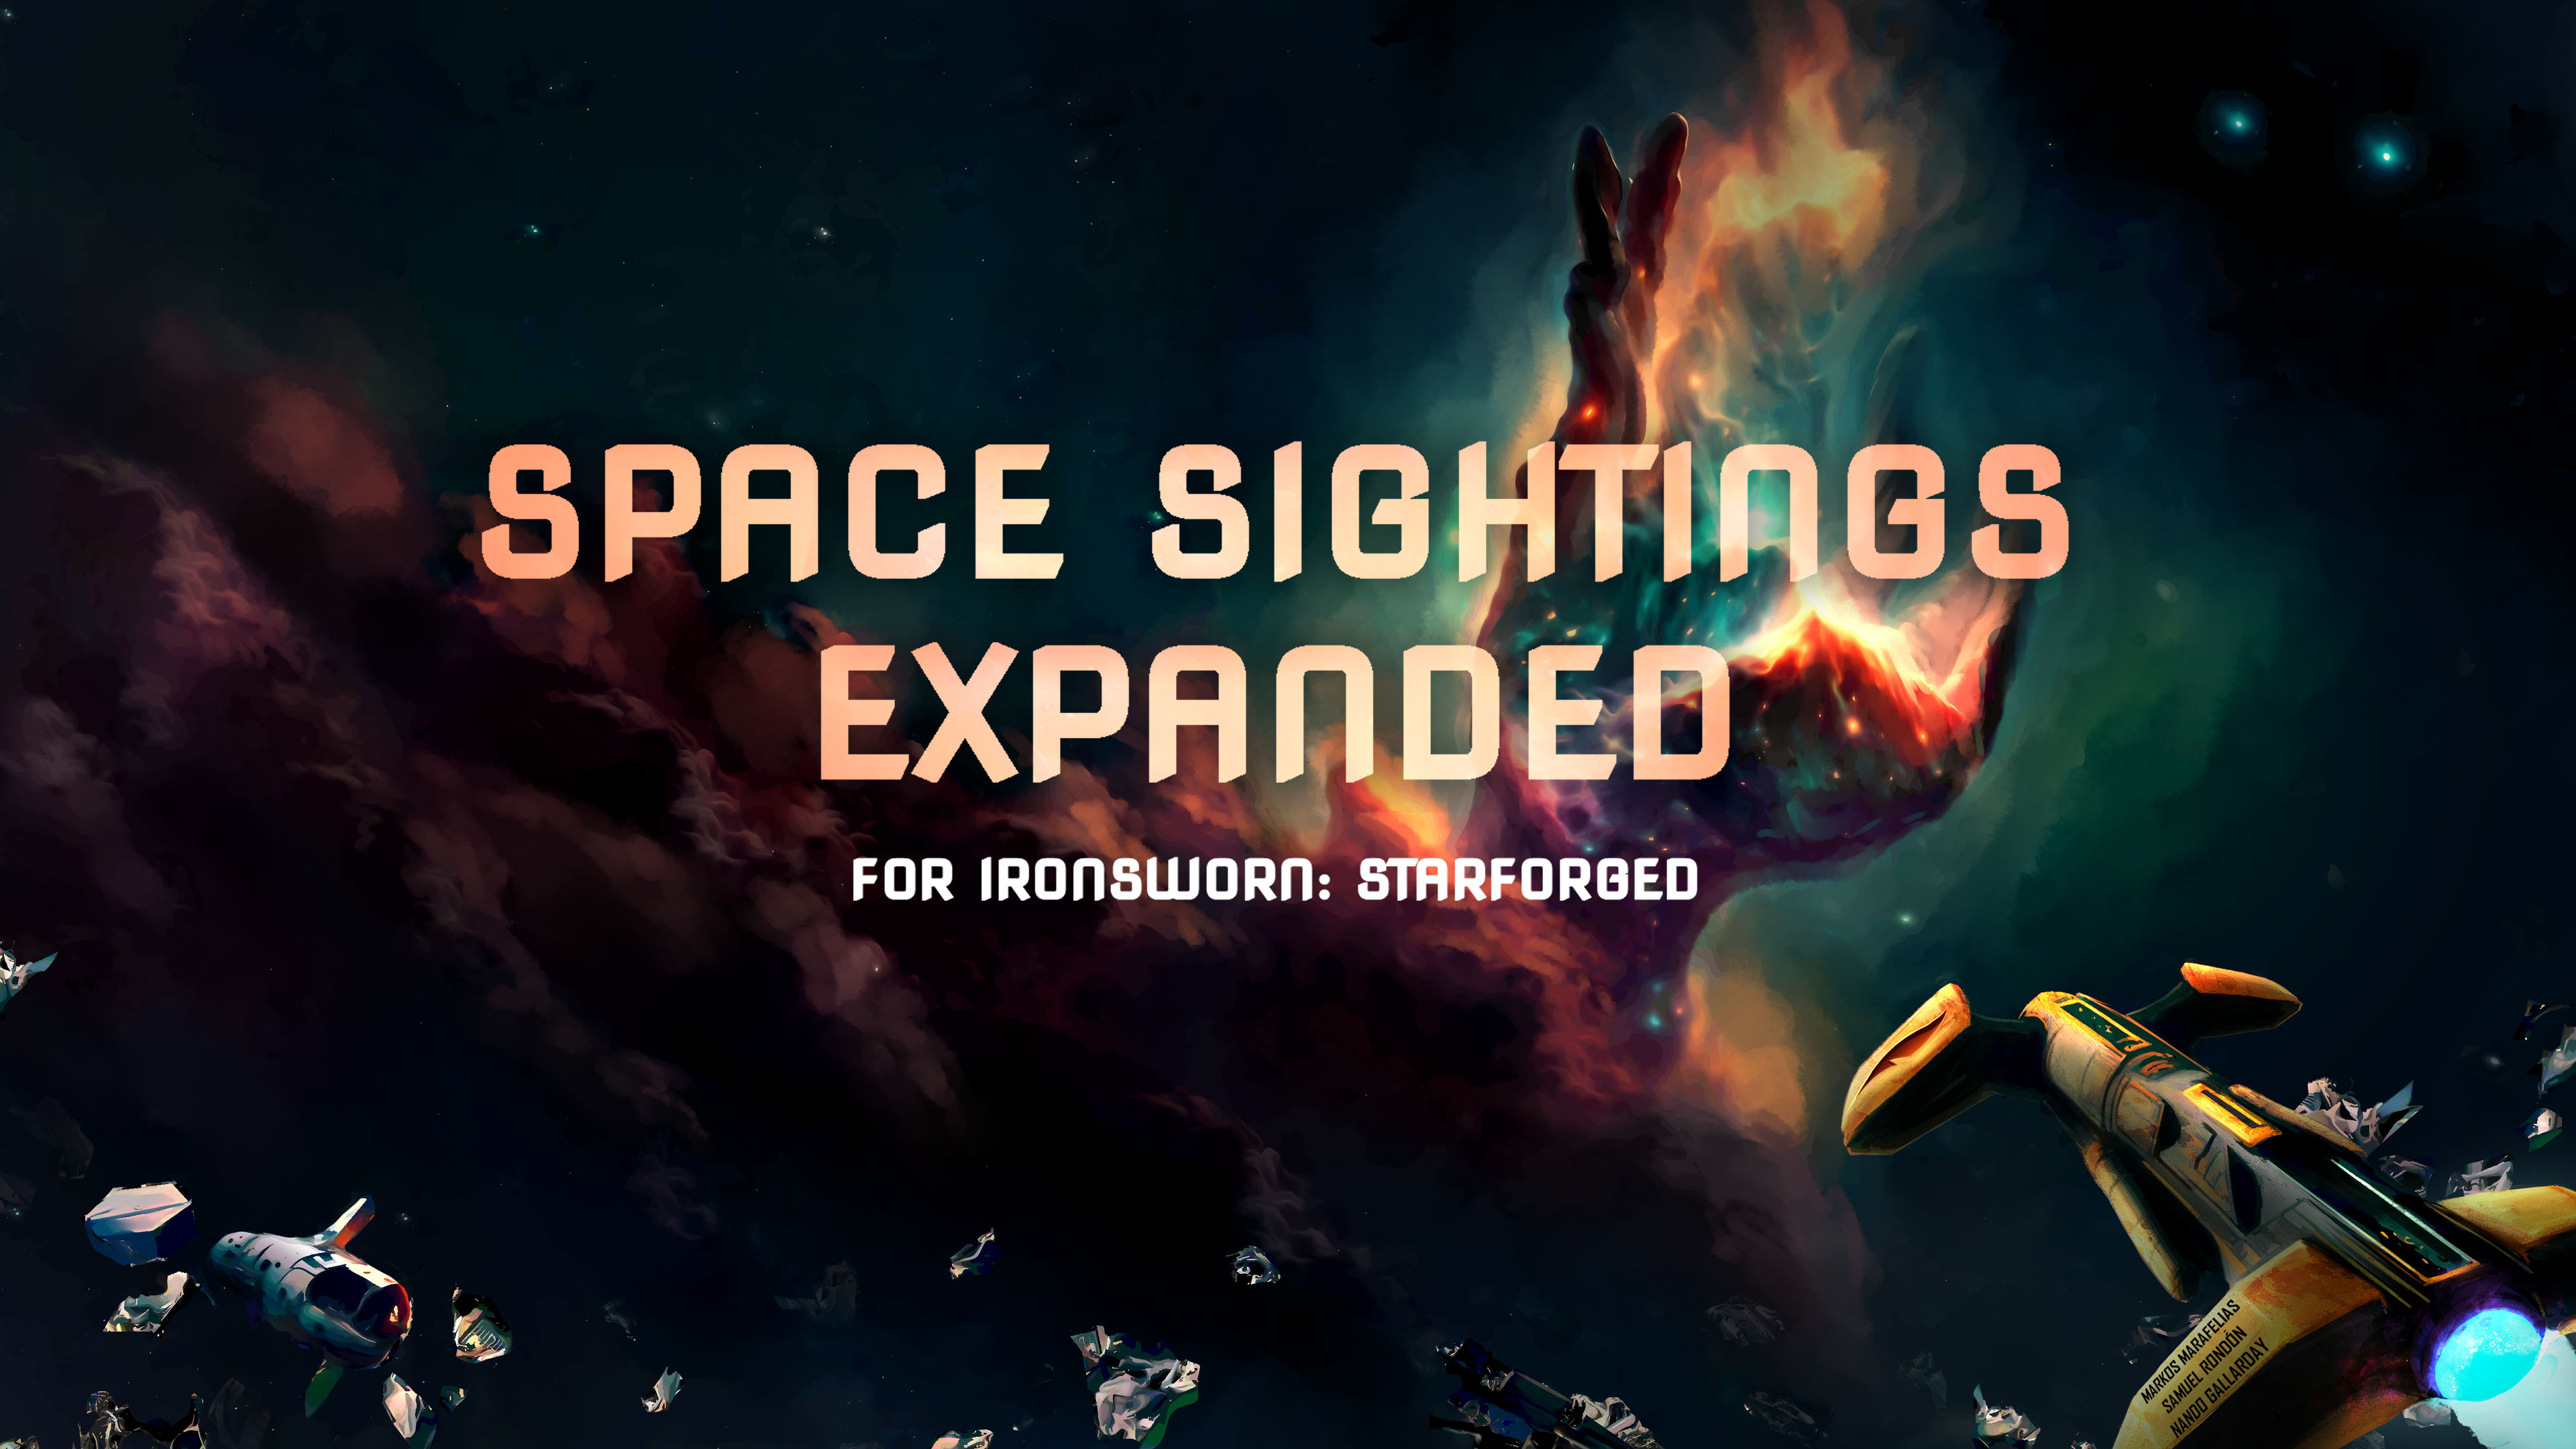 Space Sightings Expanded